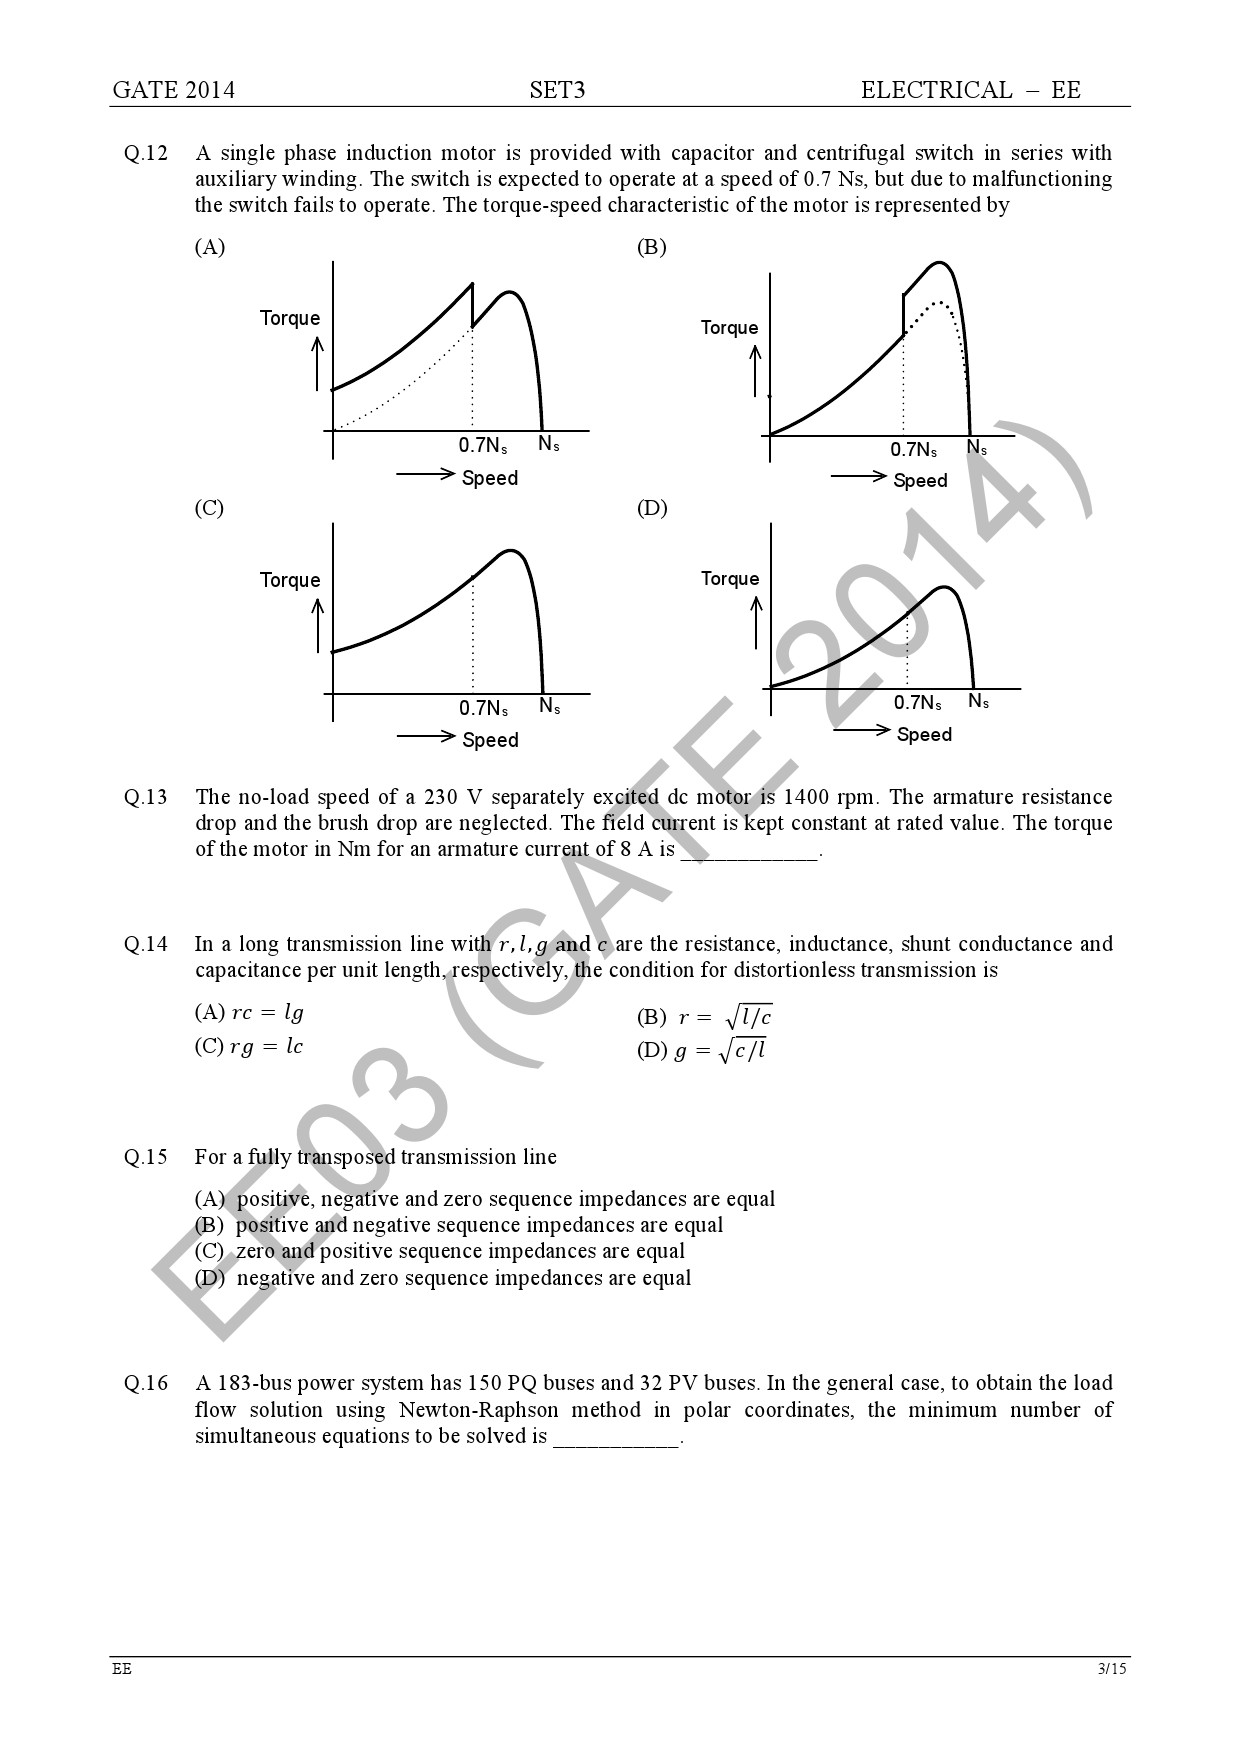 GATE Exam Question Paper 2014 Electrical Engineering Set 3 9